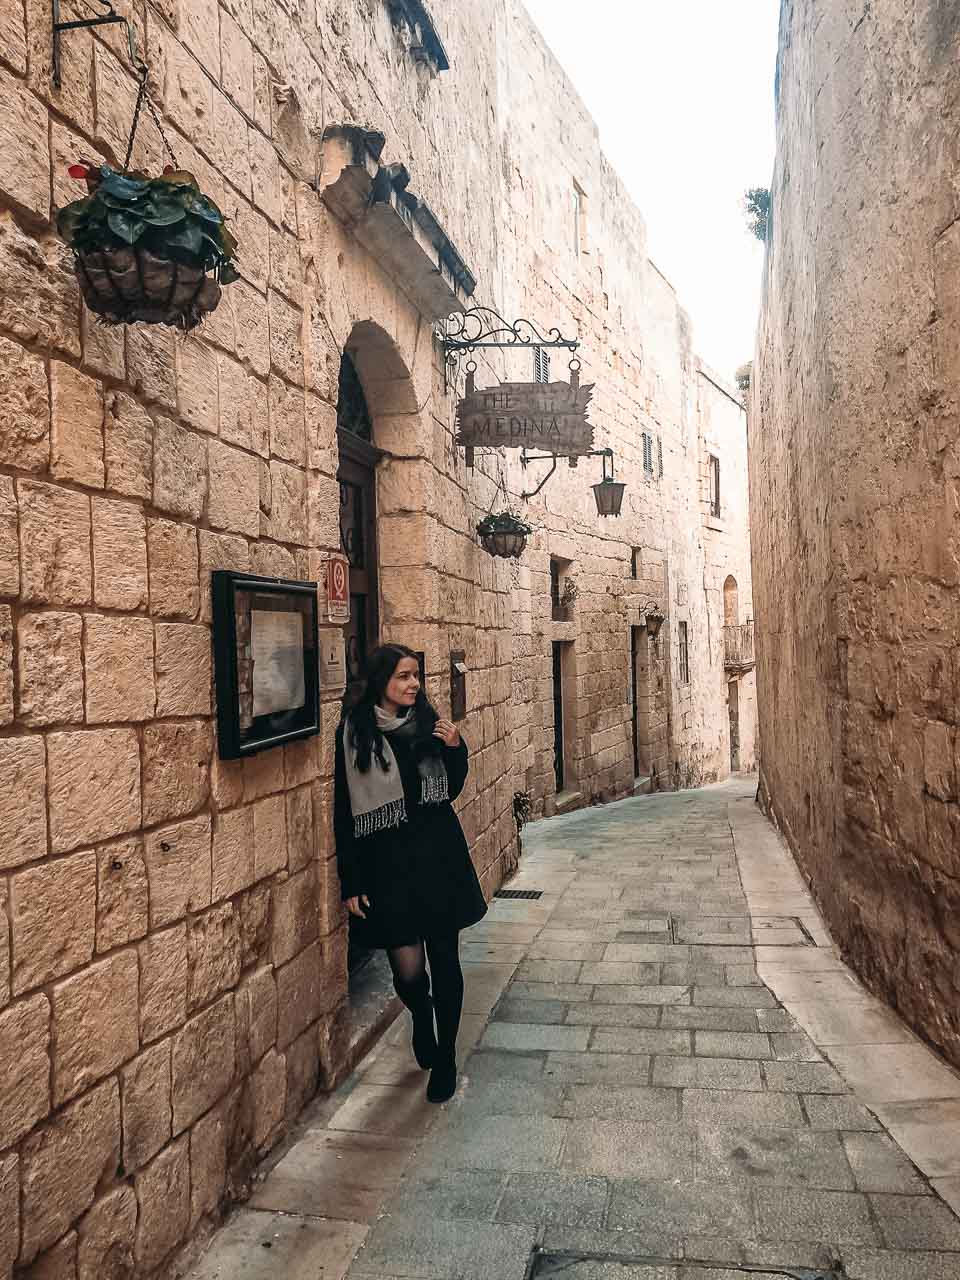 A girl standing in a traditional alley in Mdina, Malta